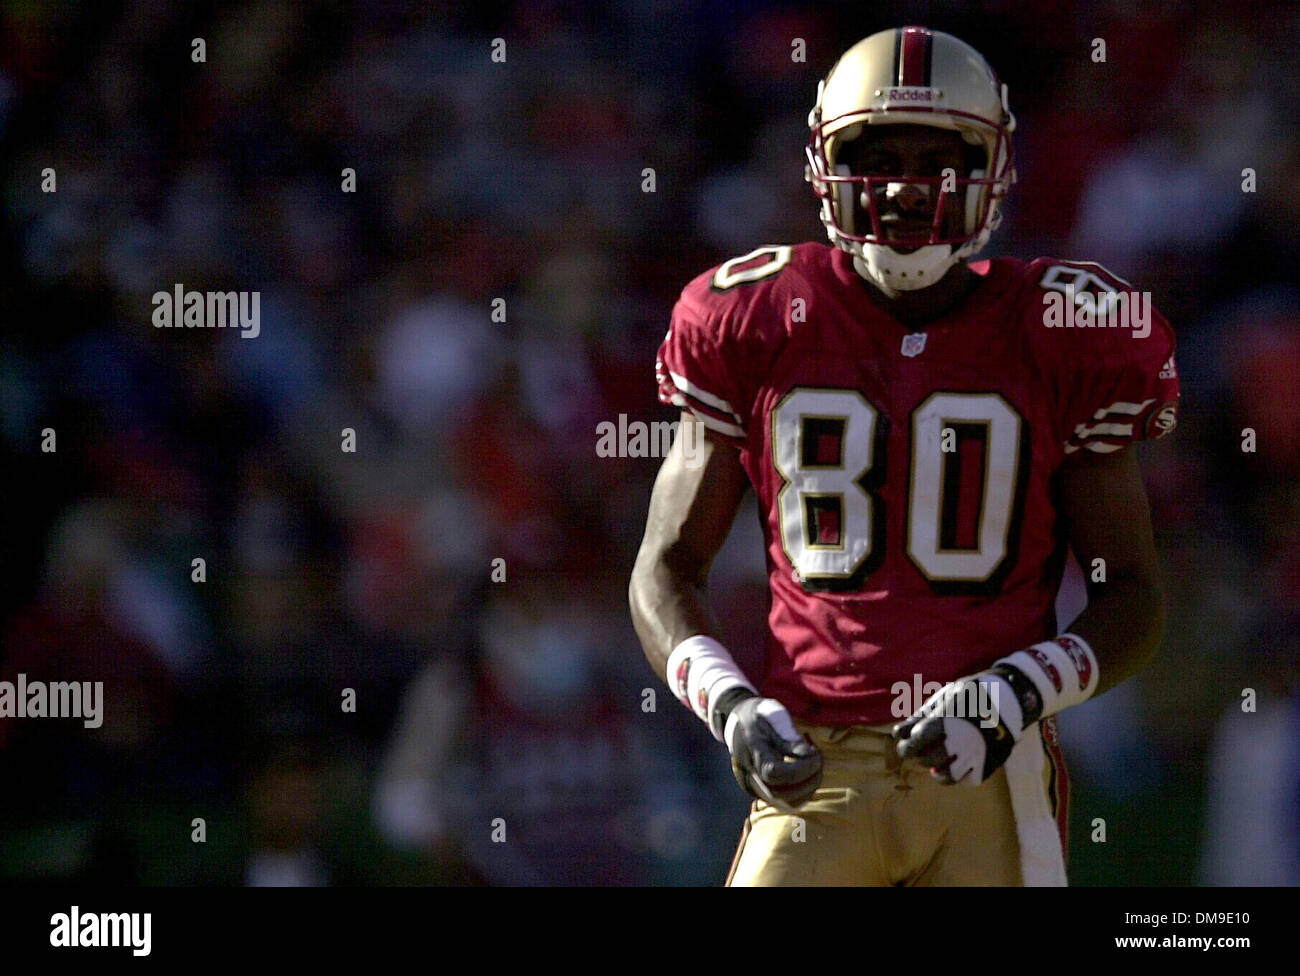 San Francisco 49ers wide reciever Jerry Rice in game against the St. Louis  Rams at 3Com Park, San Francisco, CA. Rams went on to win the game, 34-24.  10/29/00 (Sacramento Bee/Jose M.